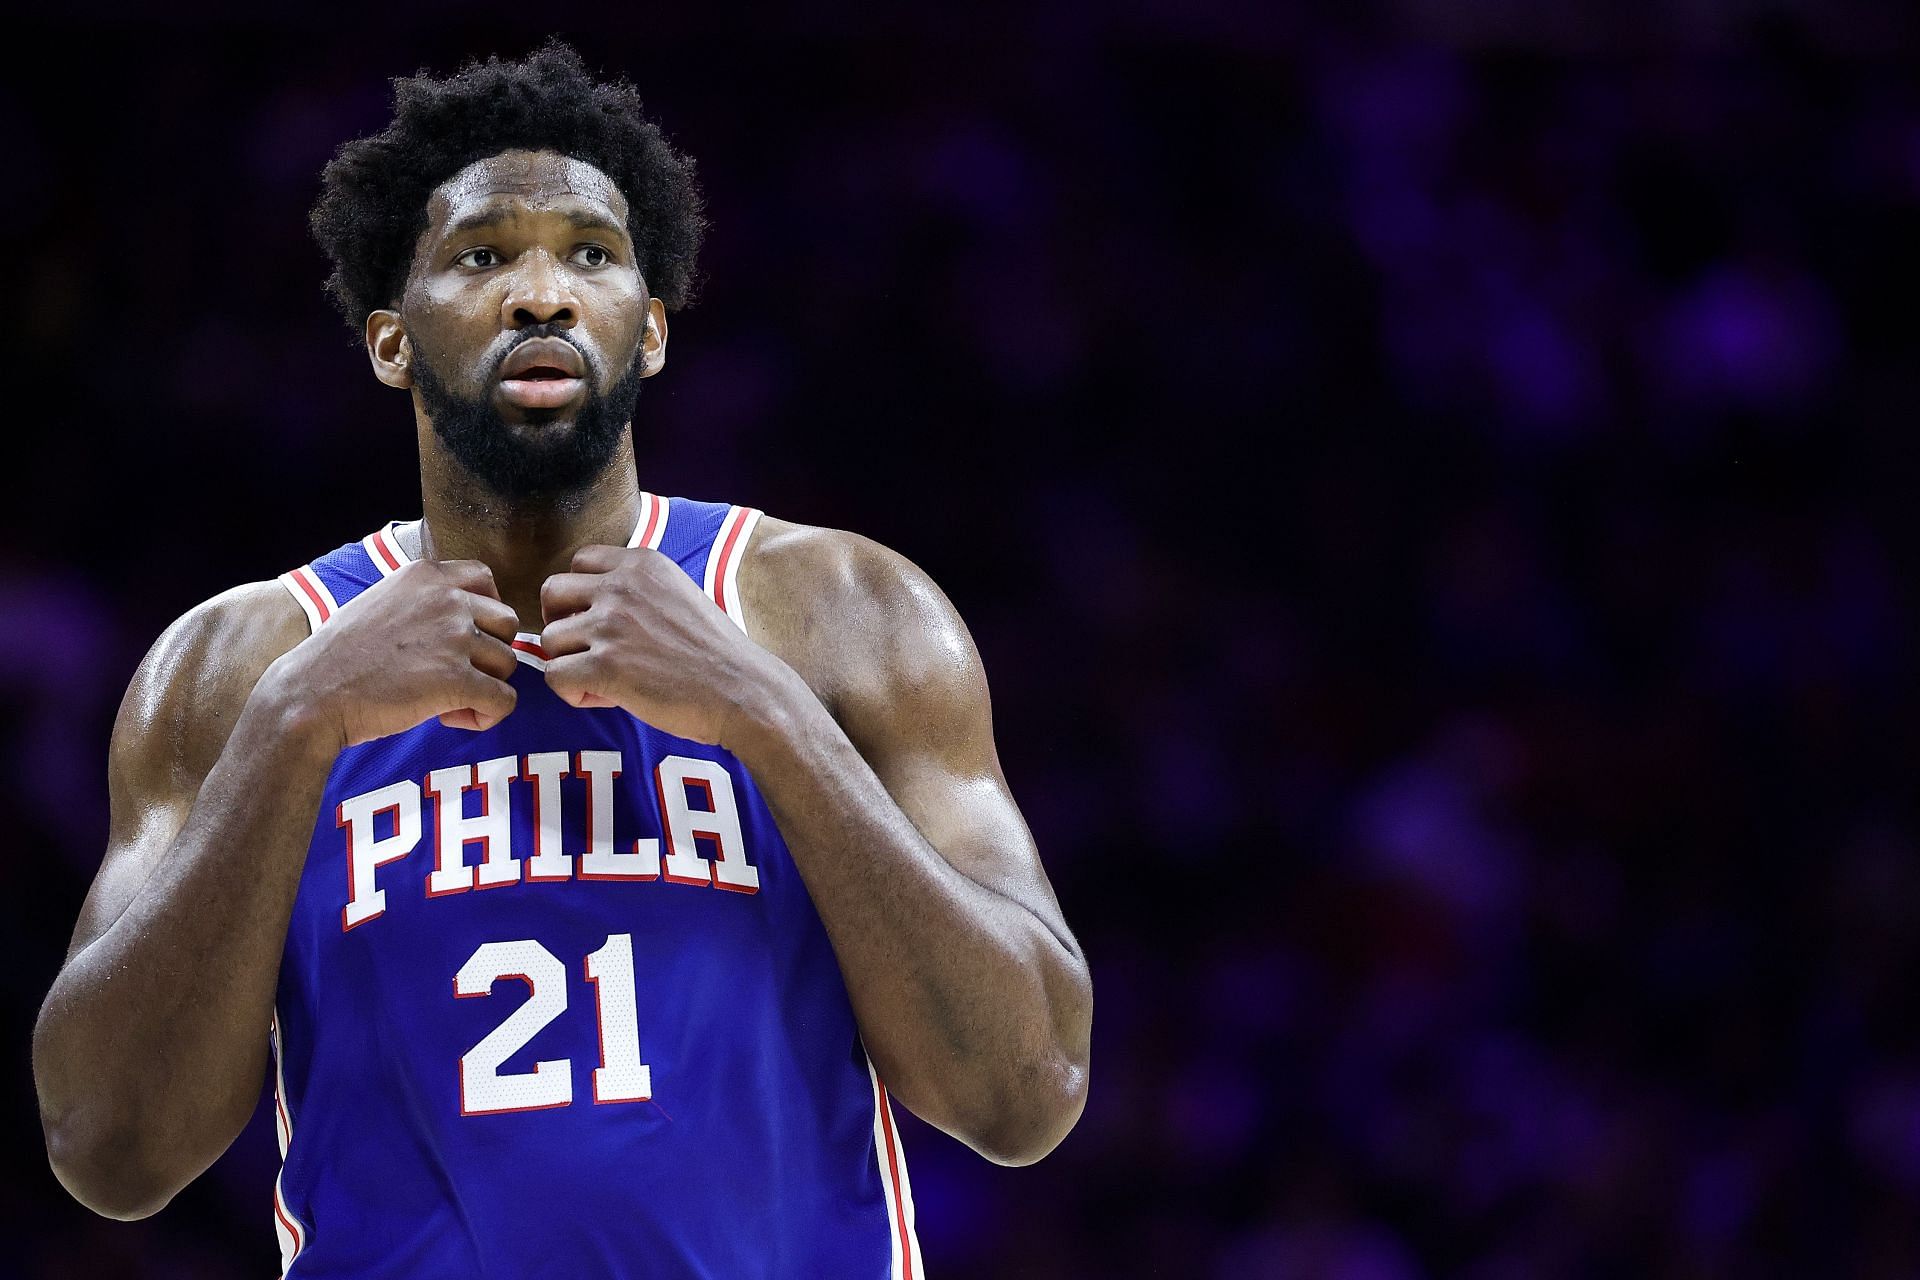 Watch Joel Embiid hits ridiculous FULL-COURT shot to unbelievably tie the game but time runs out before he released it